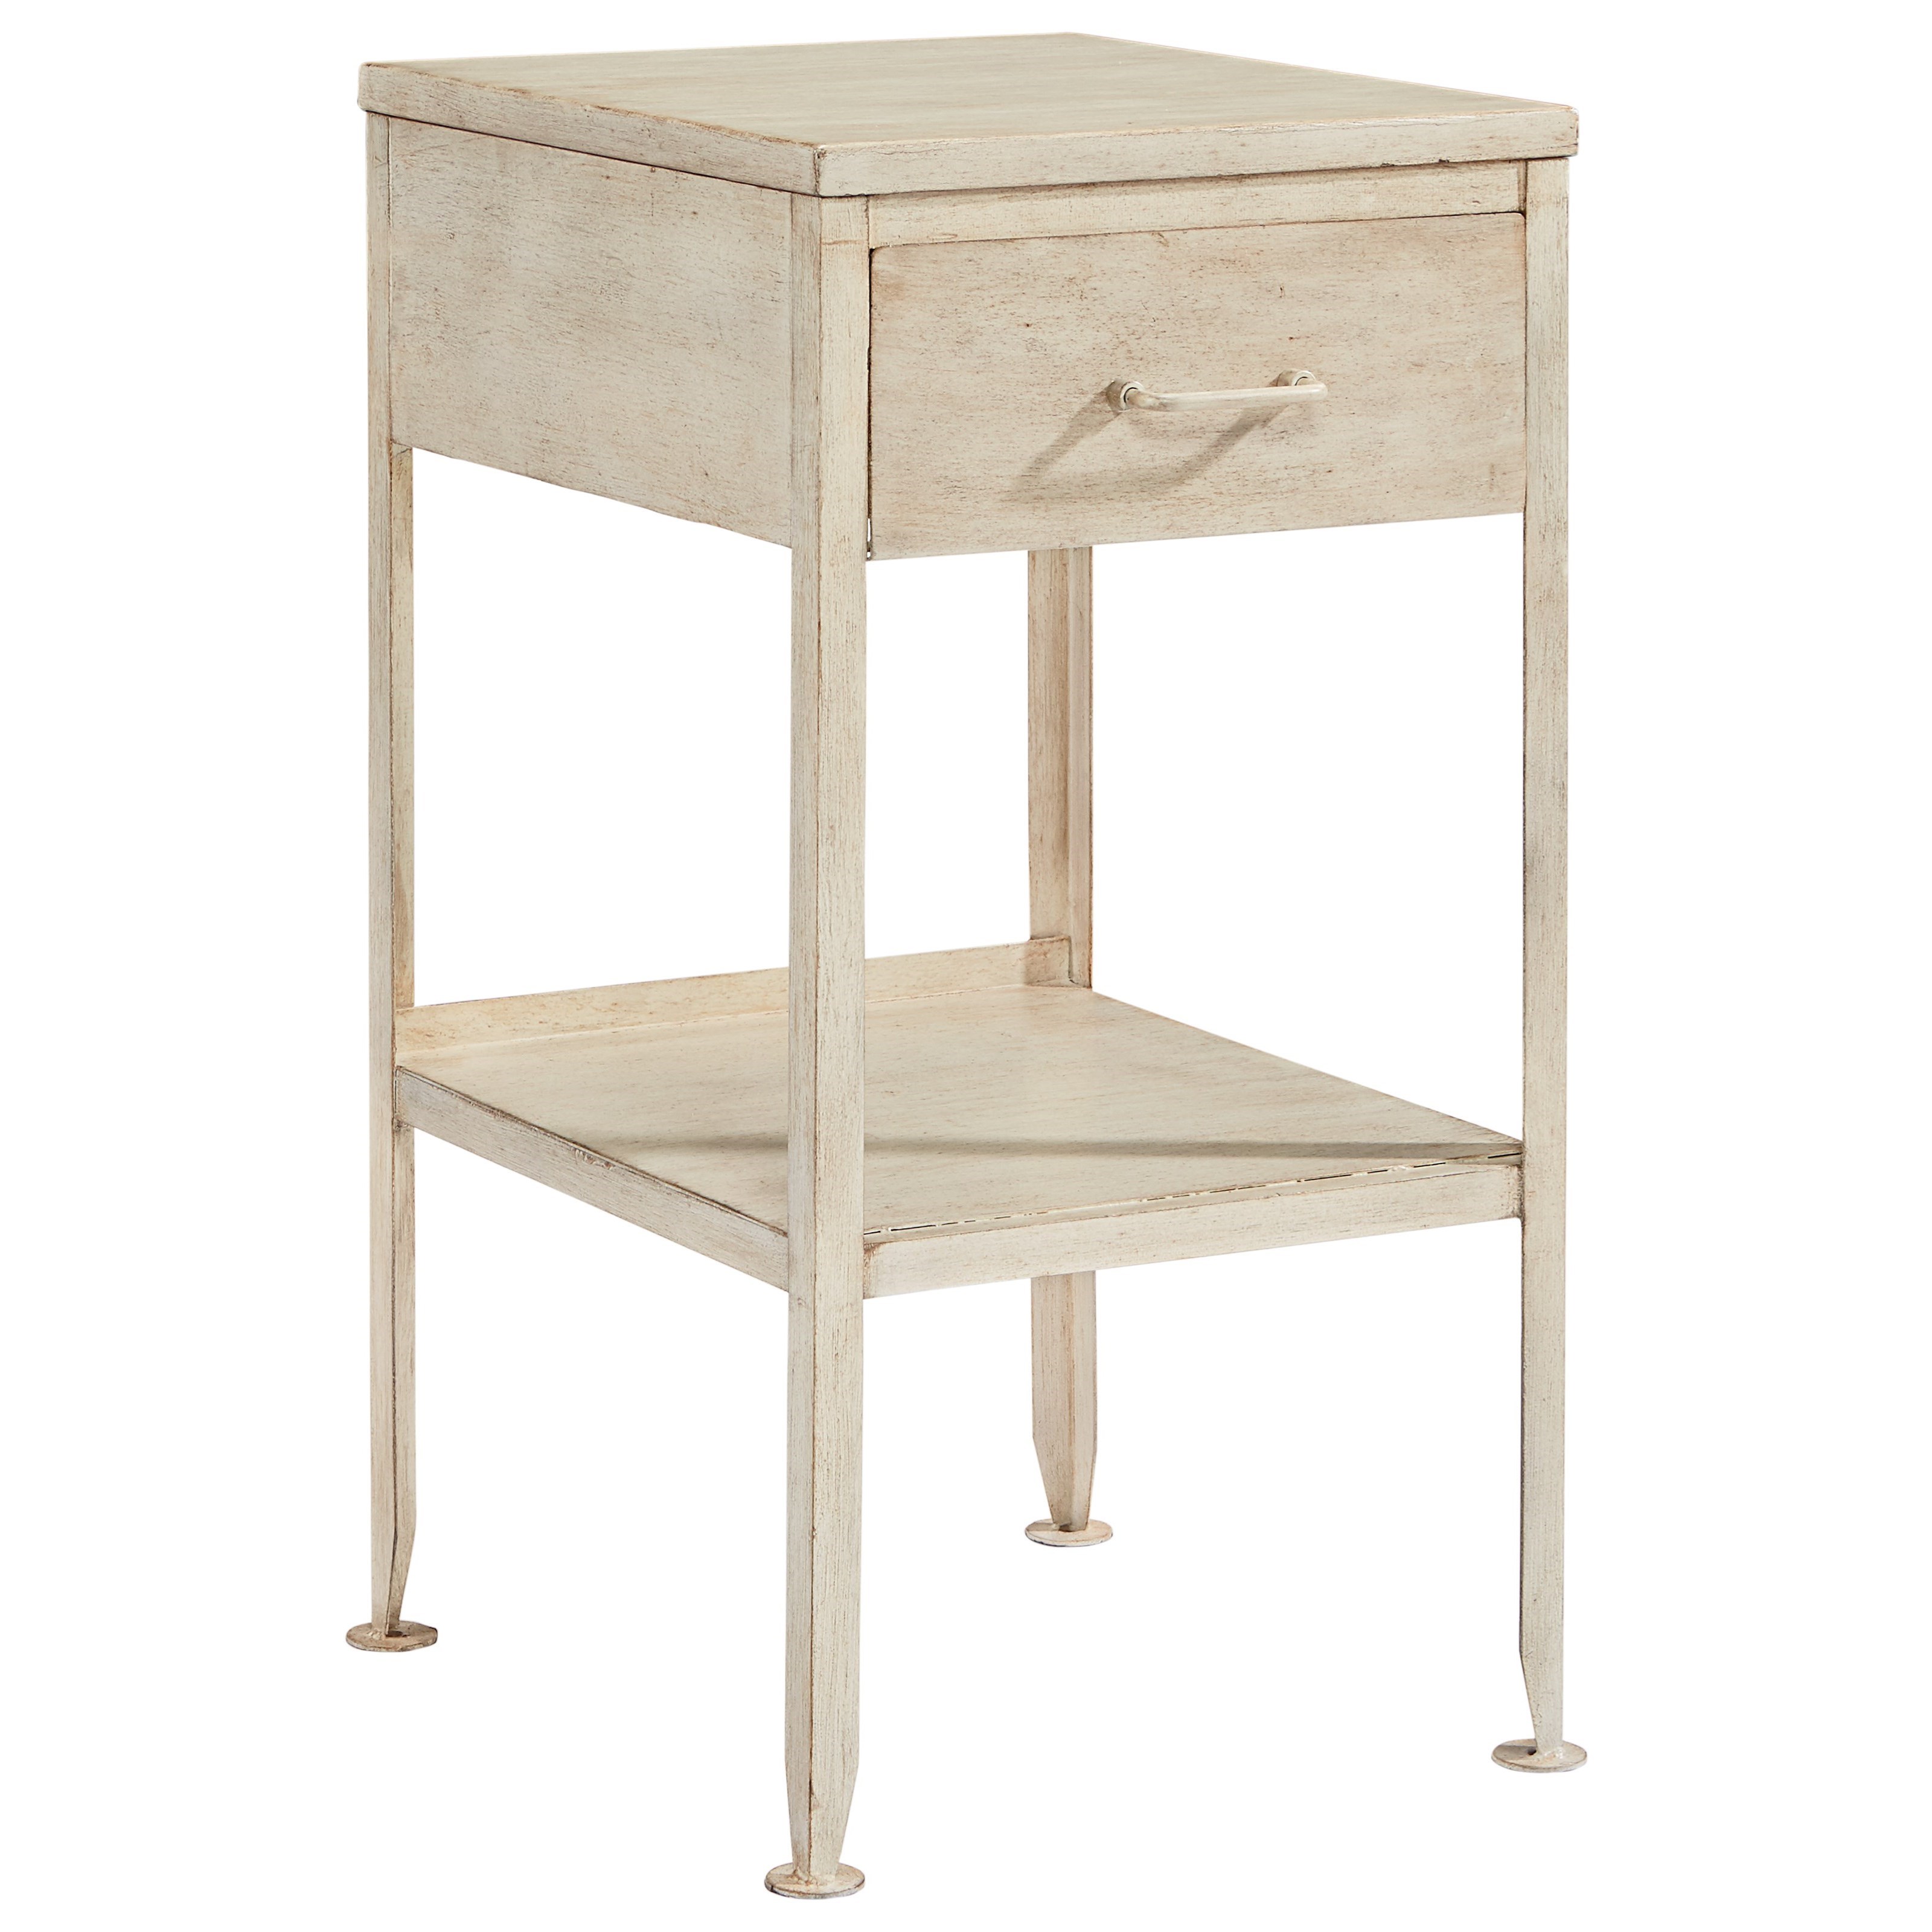 magnolia home joanna gaines accent elements small metal end table products color shelf side bar dining bath and beyond registry login modern white marble coffee flannel backed